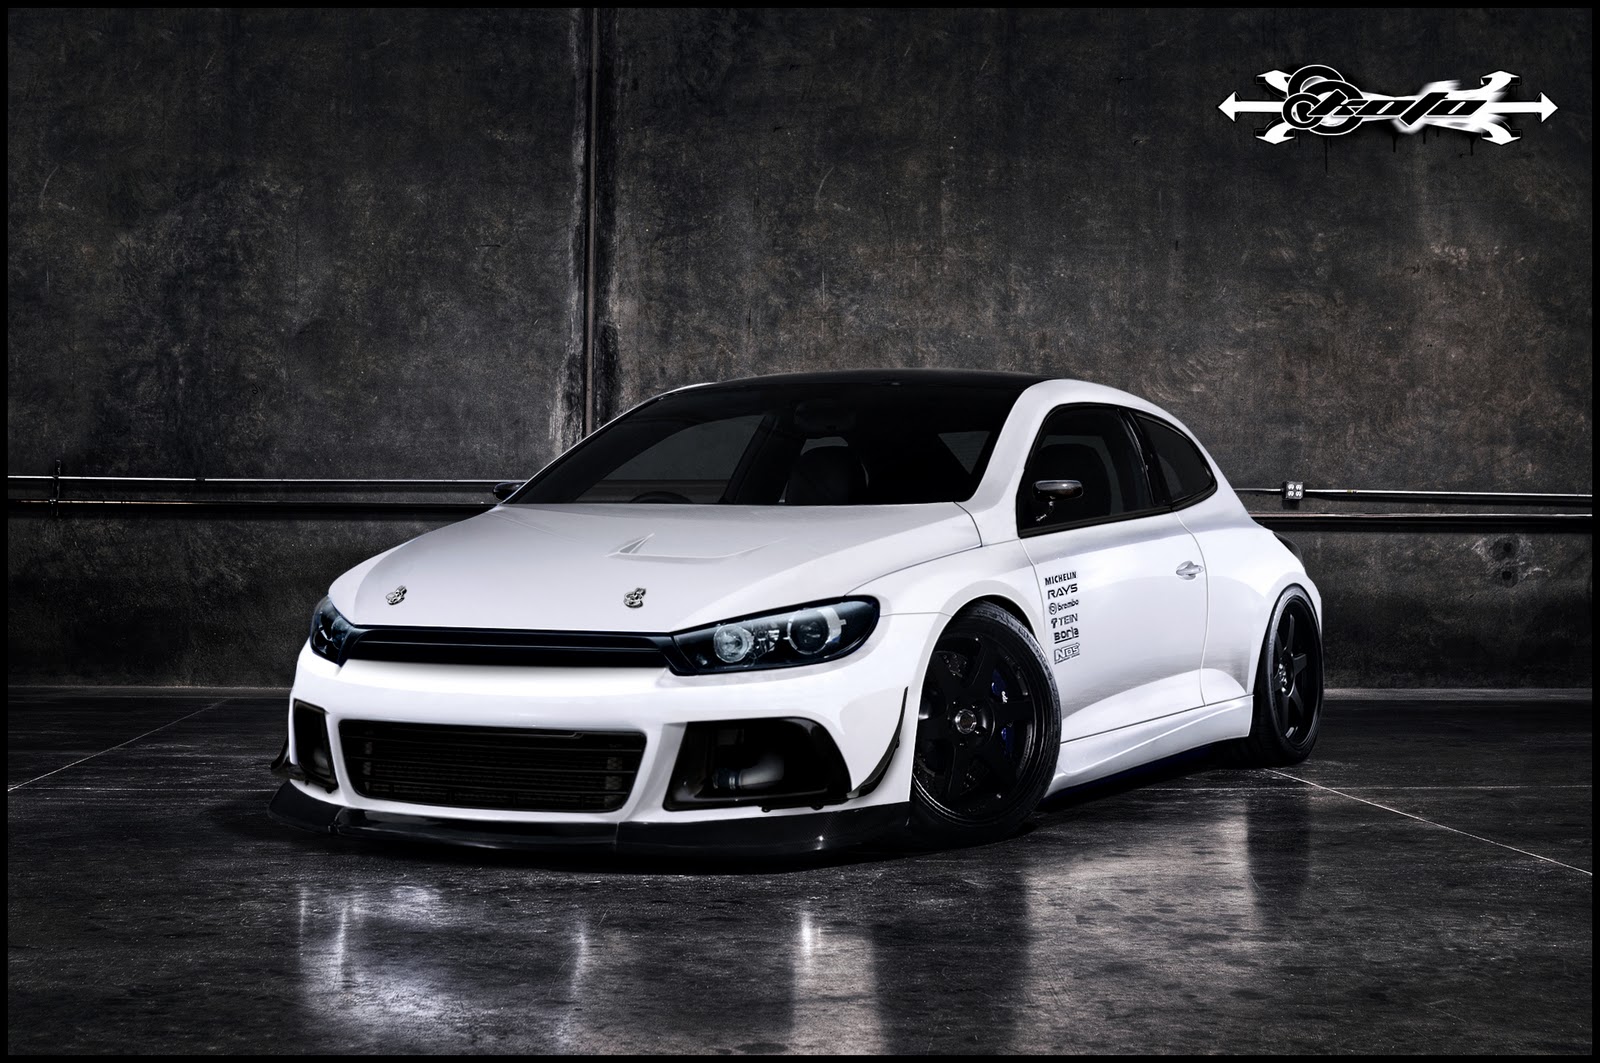 Free Cars HD Wallpapers Volkswagen Scirocco Tuning Car HD